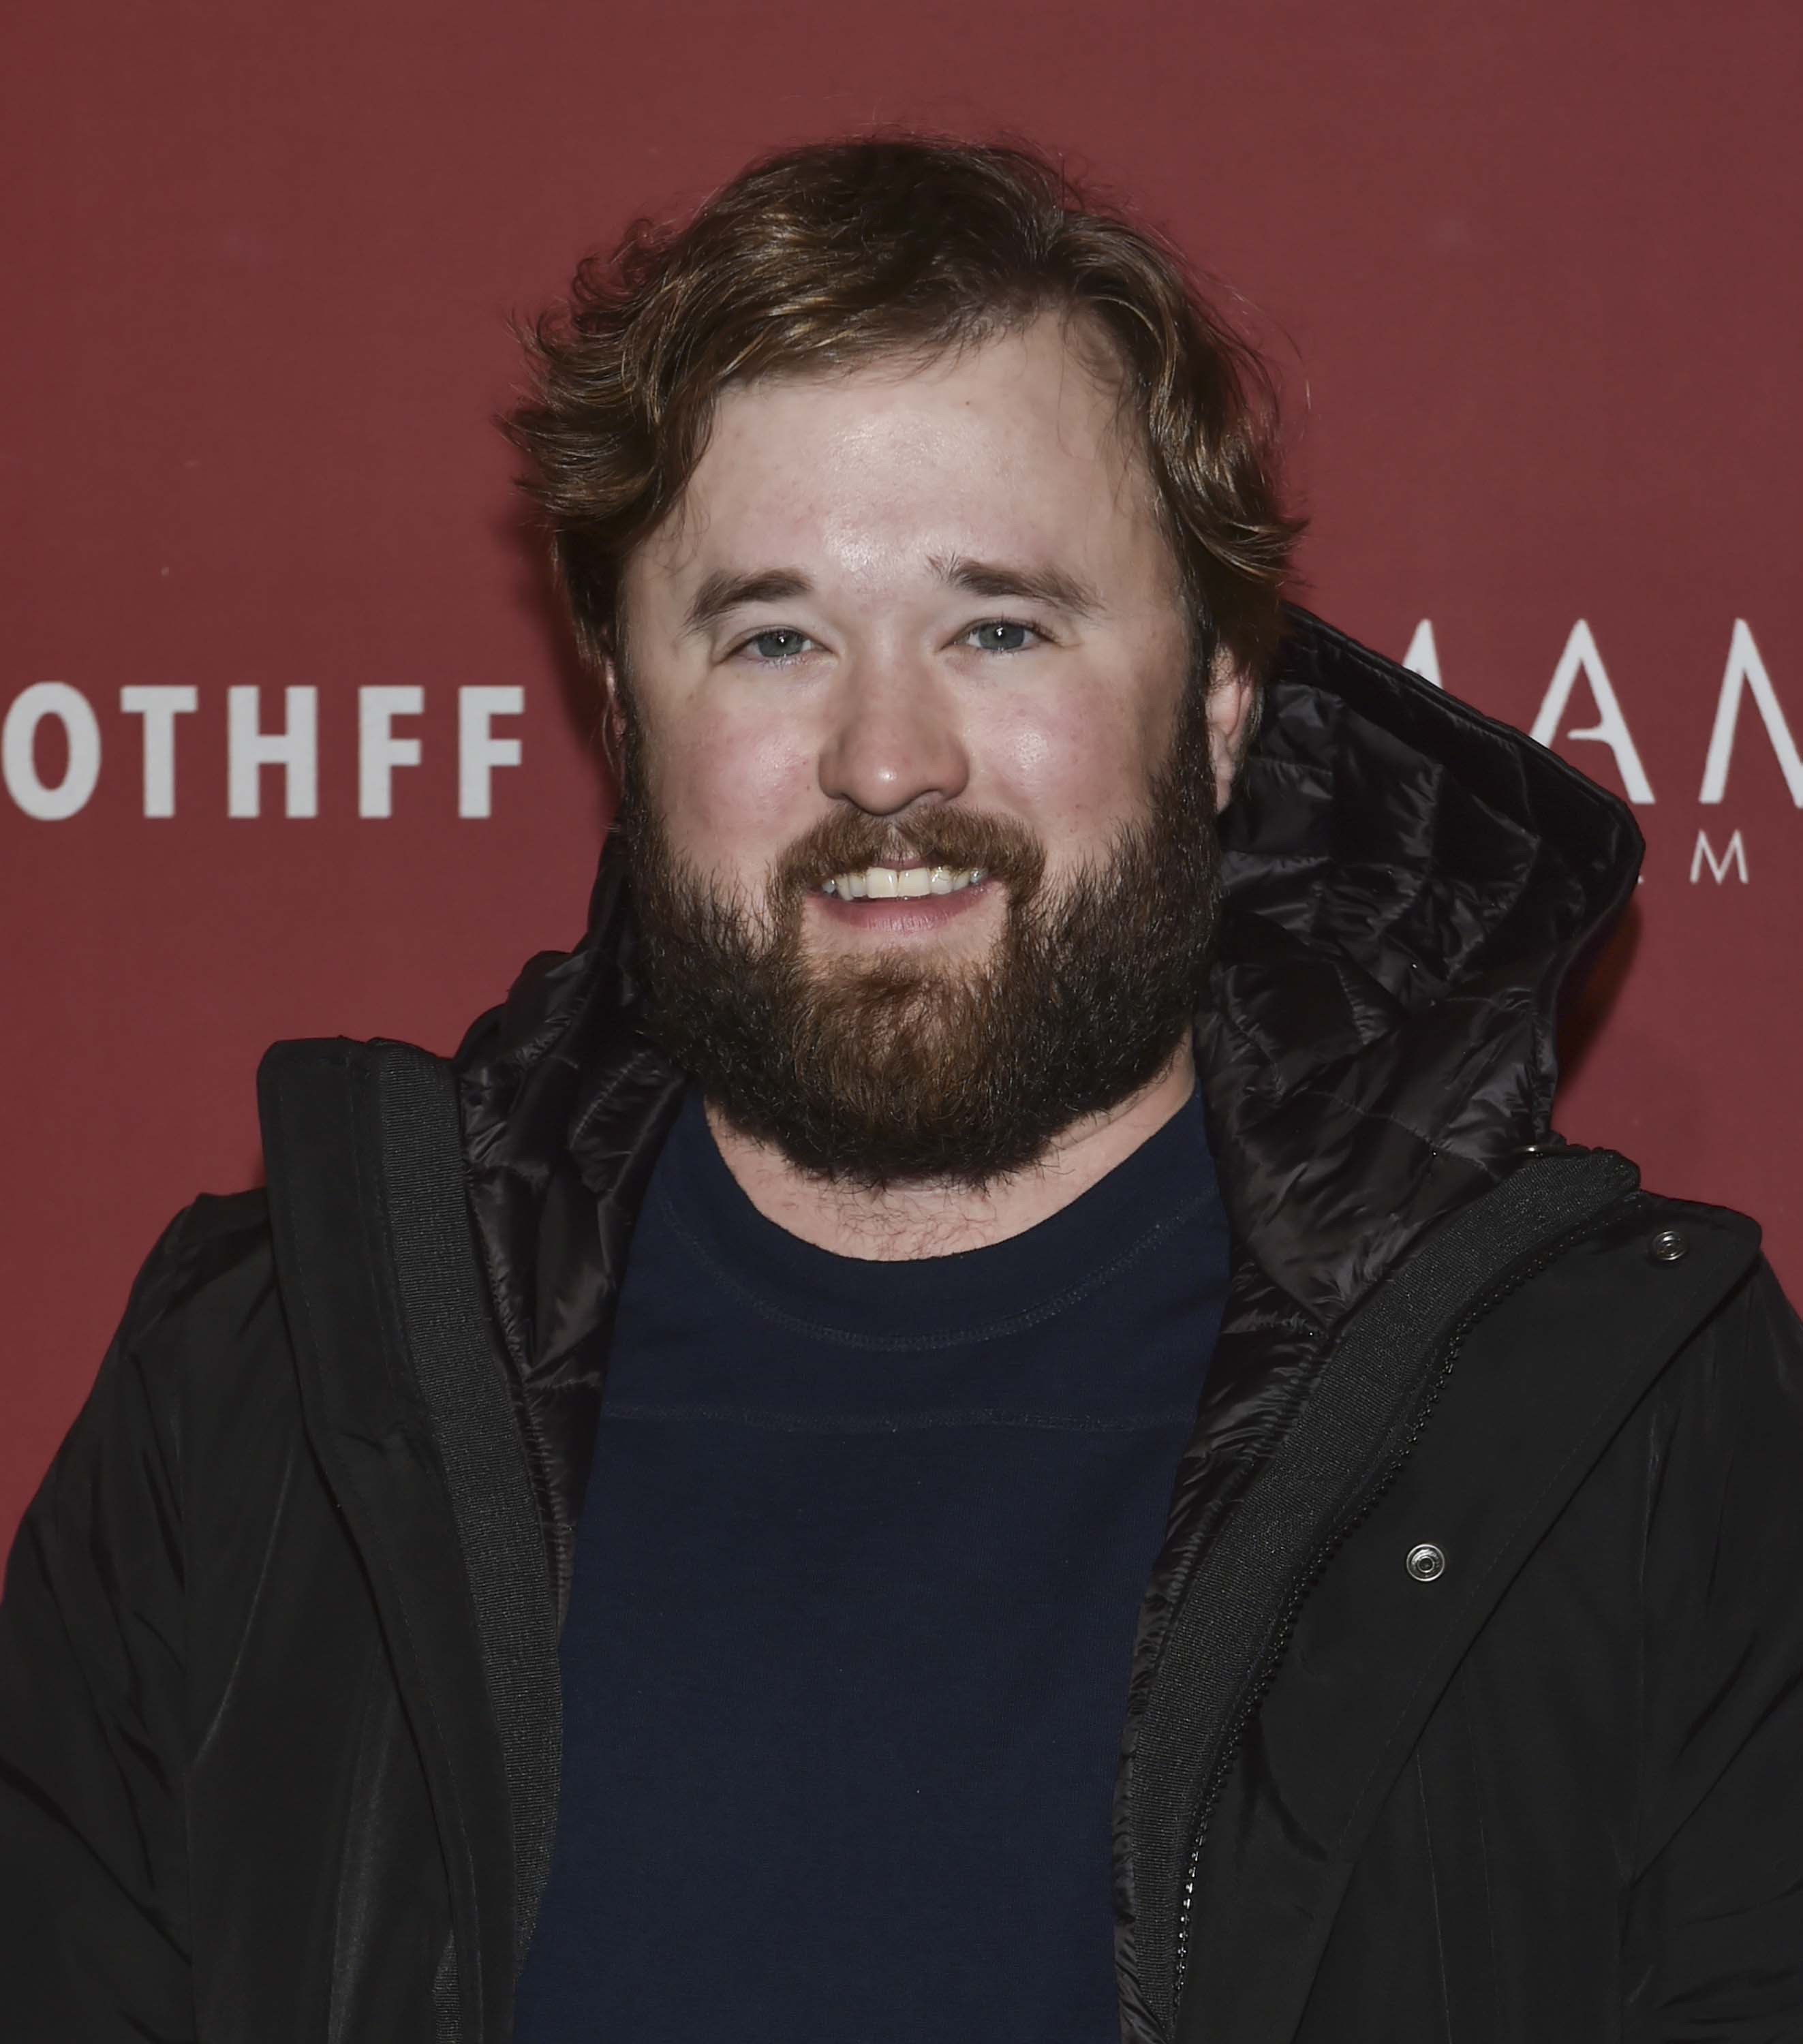 MAMMOTH, CALIFORNIA - FEBRUARY 08: Haley Joel Osment from the movie "Extremely Wicked, Shockingly Evil and Vile" at 2nd Annual Mammoth Film Festival on February 07, 2019 in Mammoth, California. (Photo by Michael Bezjian/Getty Images for 2019 Mammoth Film  (Foto: Getty Images for 2019 Mammoth Fi)